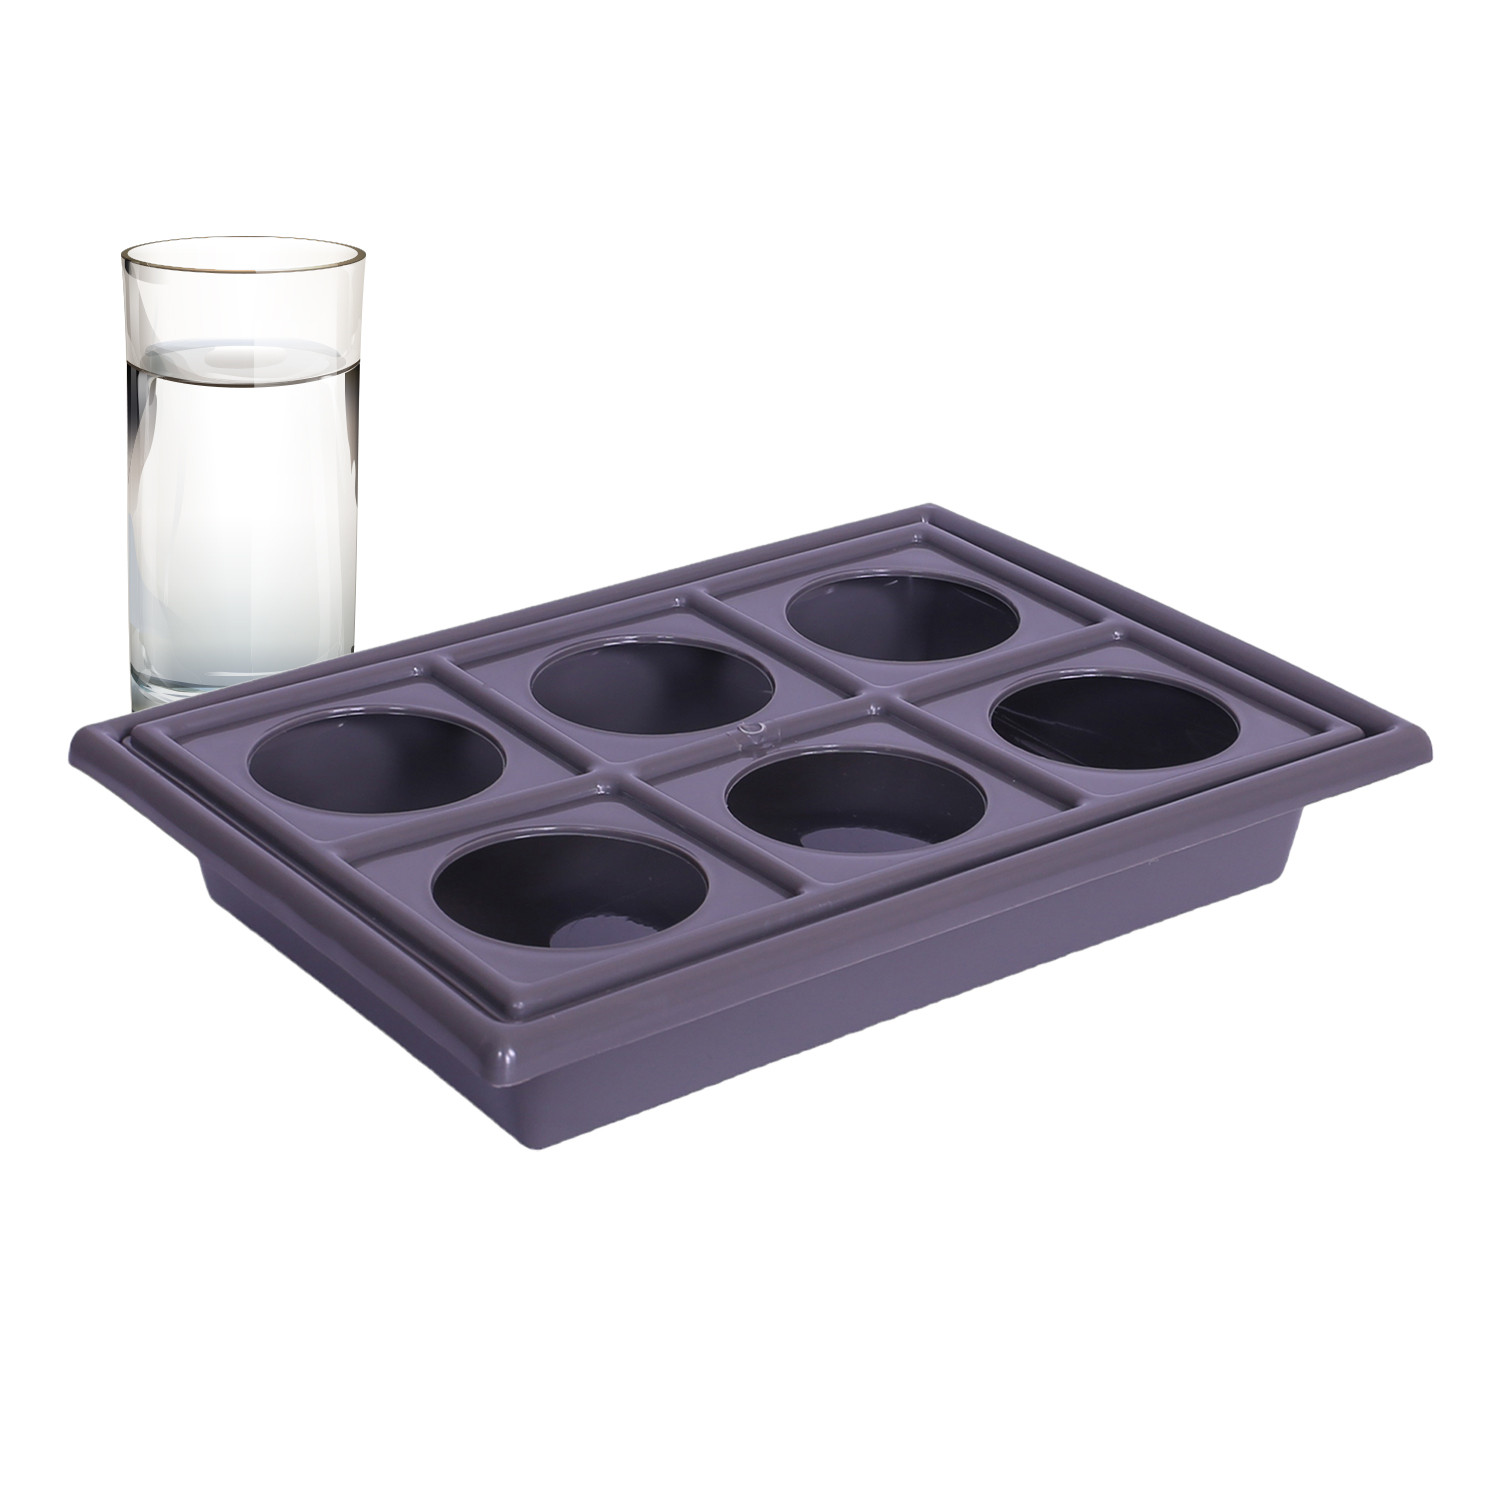 Kuber Industries Glass Tray | Plastic Glass Holder | Tray with Cutout Handles | Glass Serving Tray | Glass Holder Tray for Seving | Kitchen Serving Tray | Gray